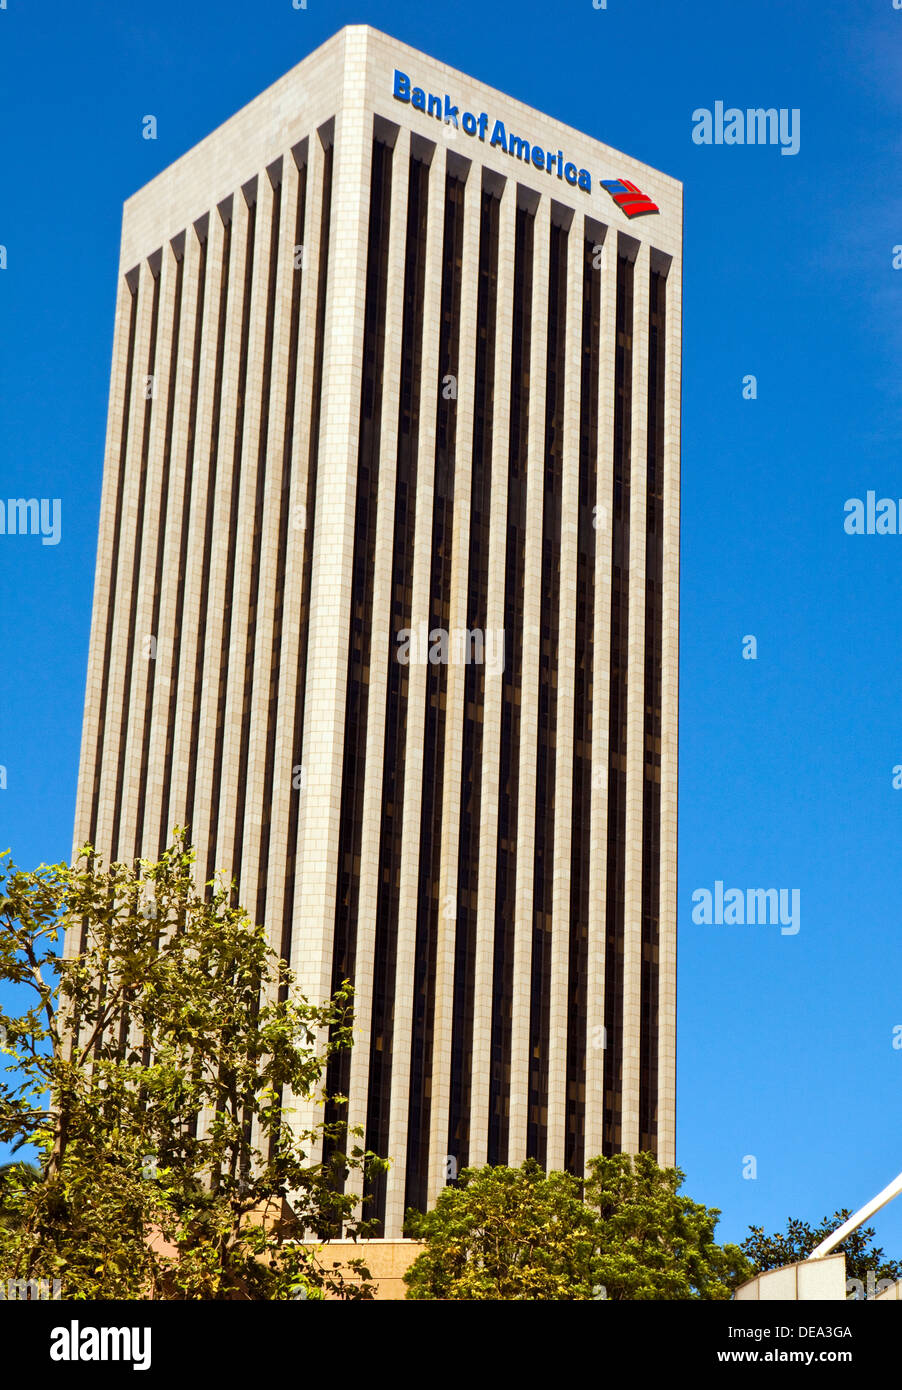 A View Of The Bank Of America Building In Downtown Los Angeles California DEA3GA 